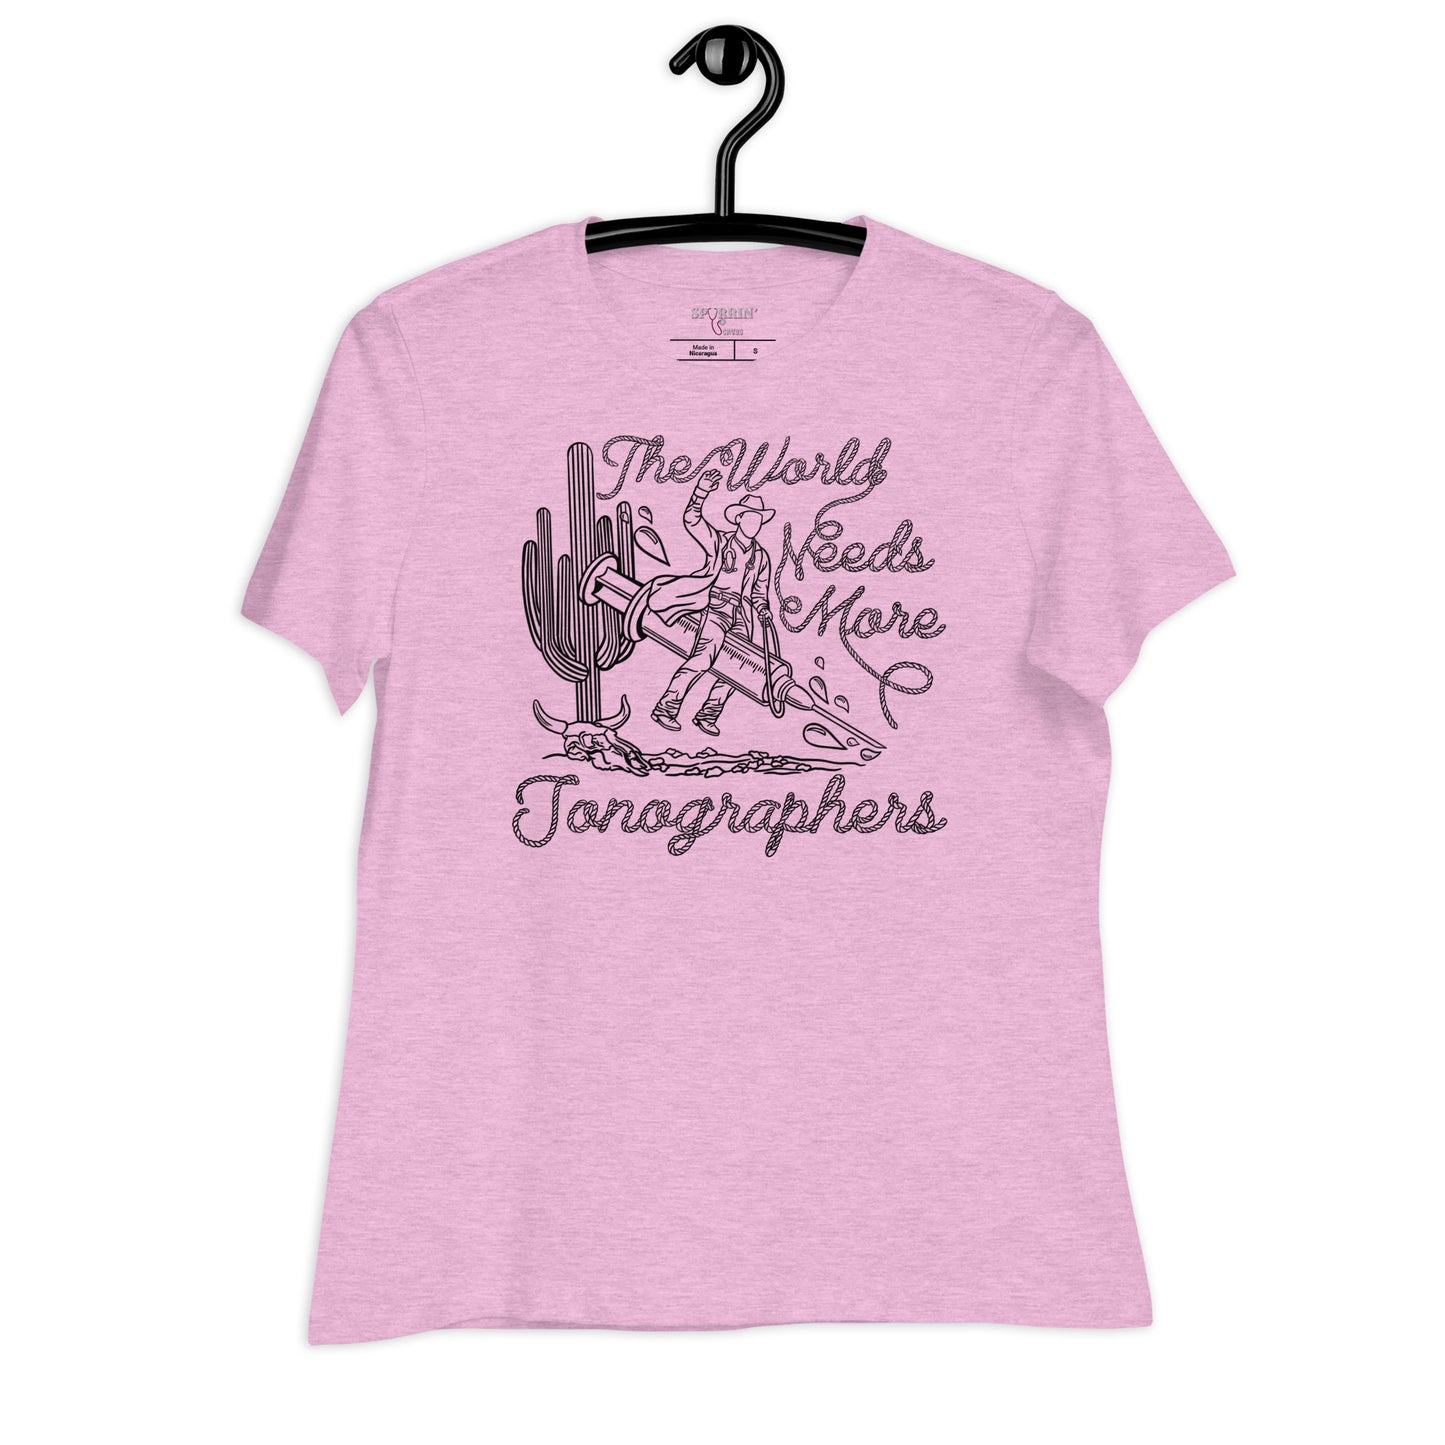 TWNM- Sonographers Relaxed T- Shirt Light Colors